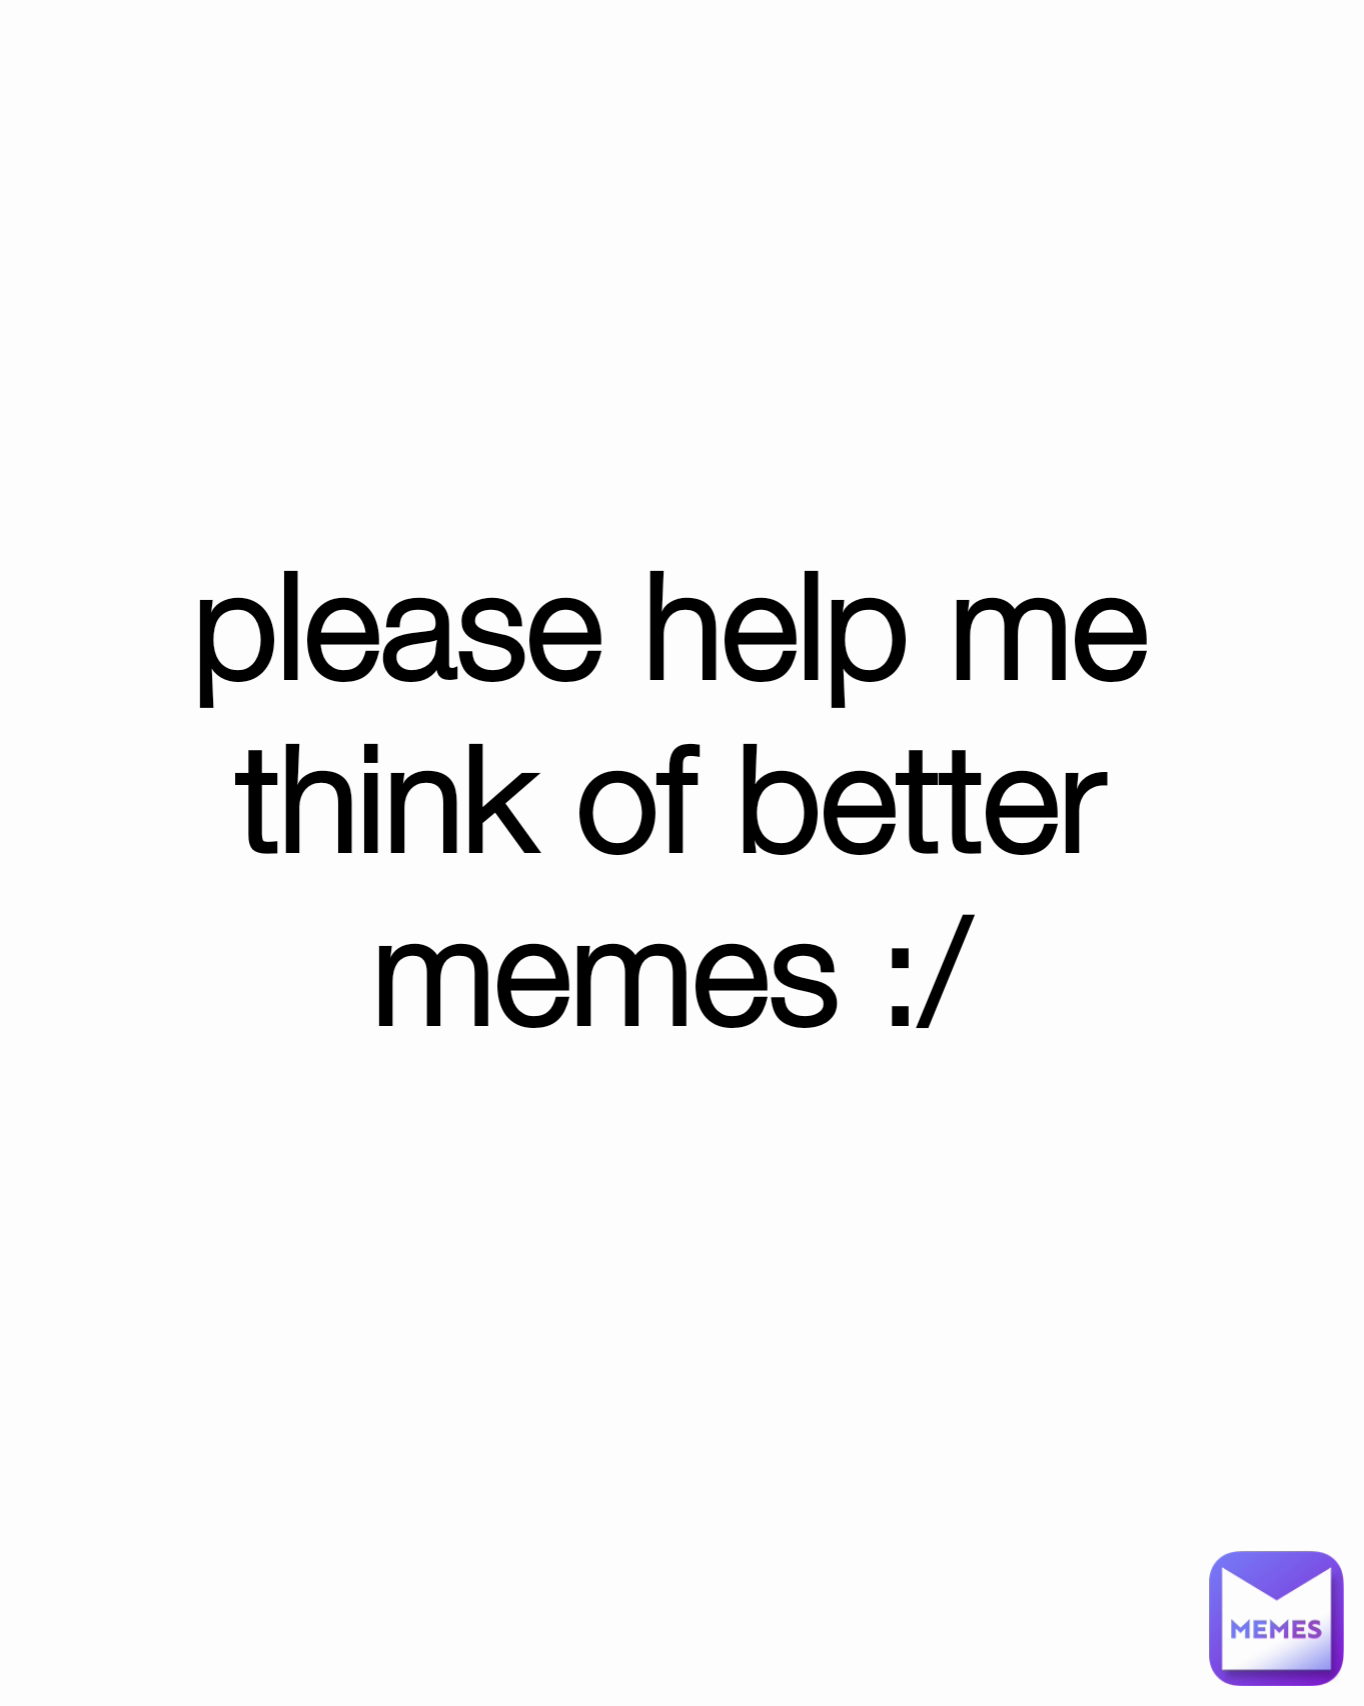 please help me think of better memes :/